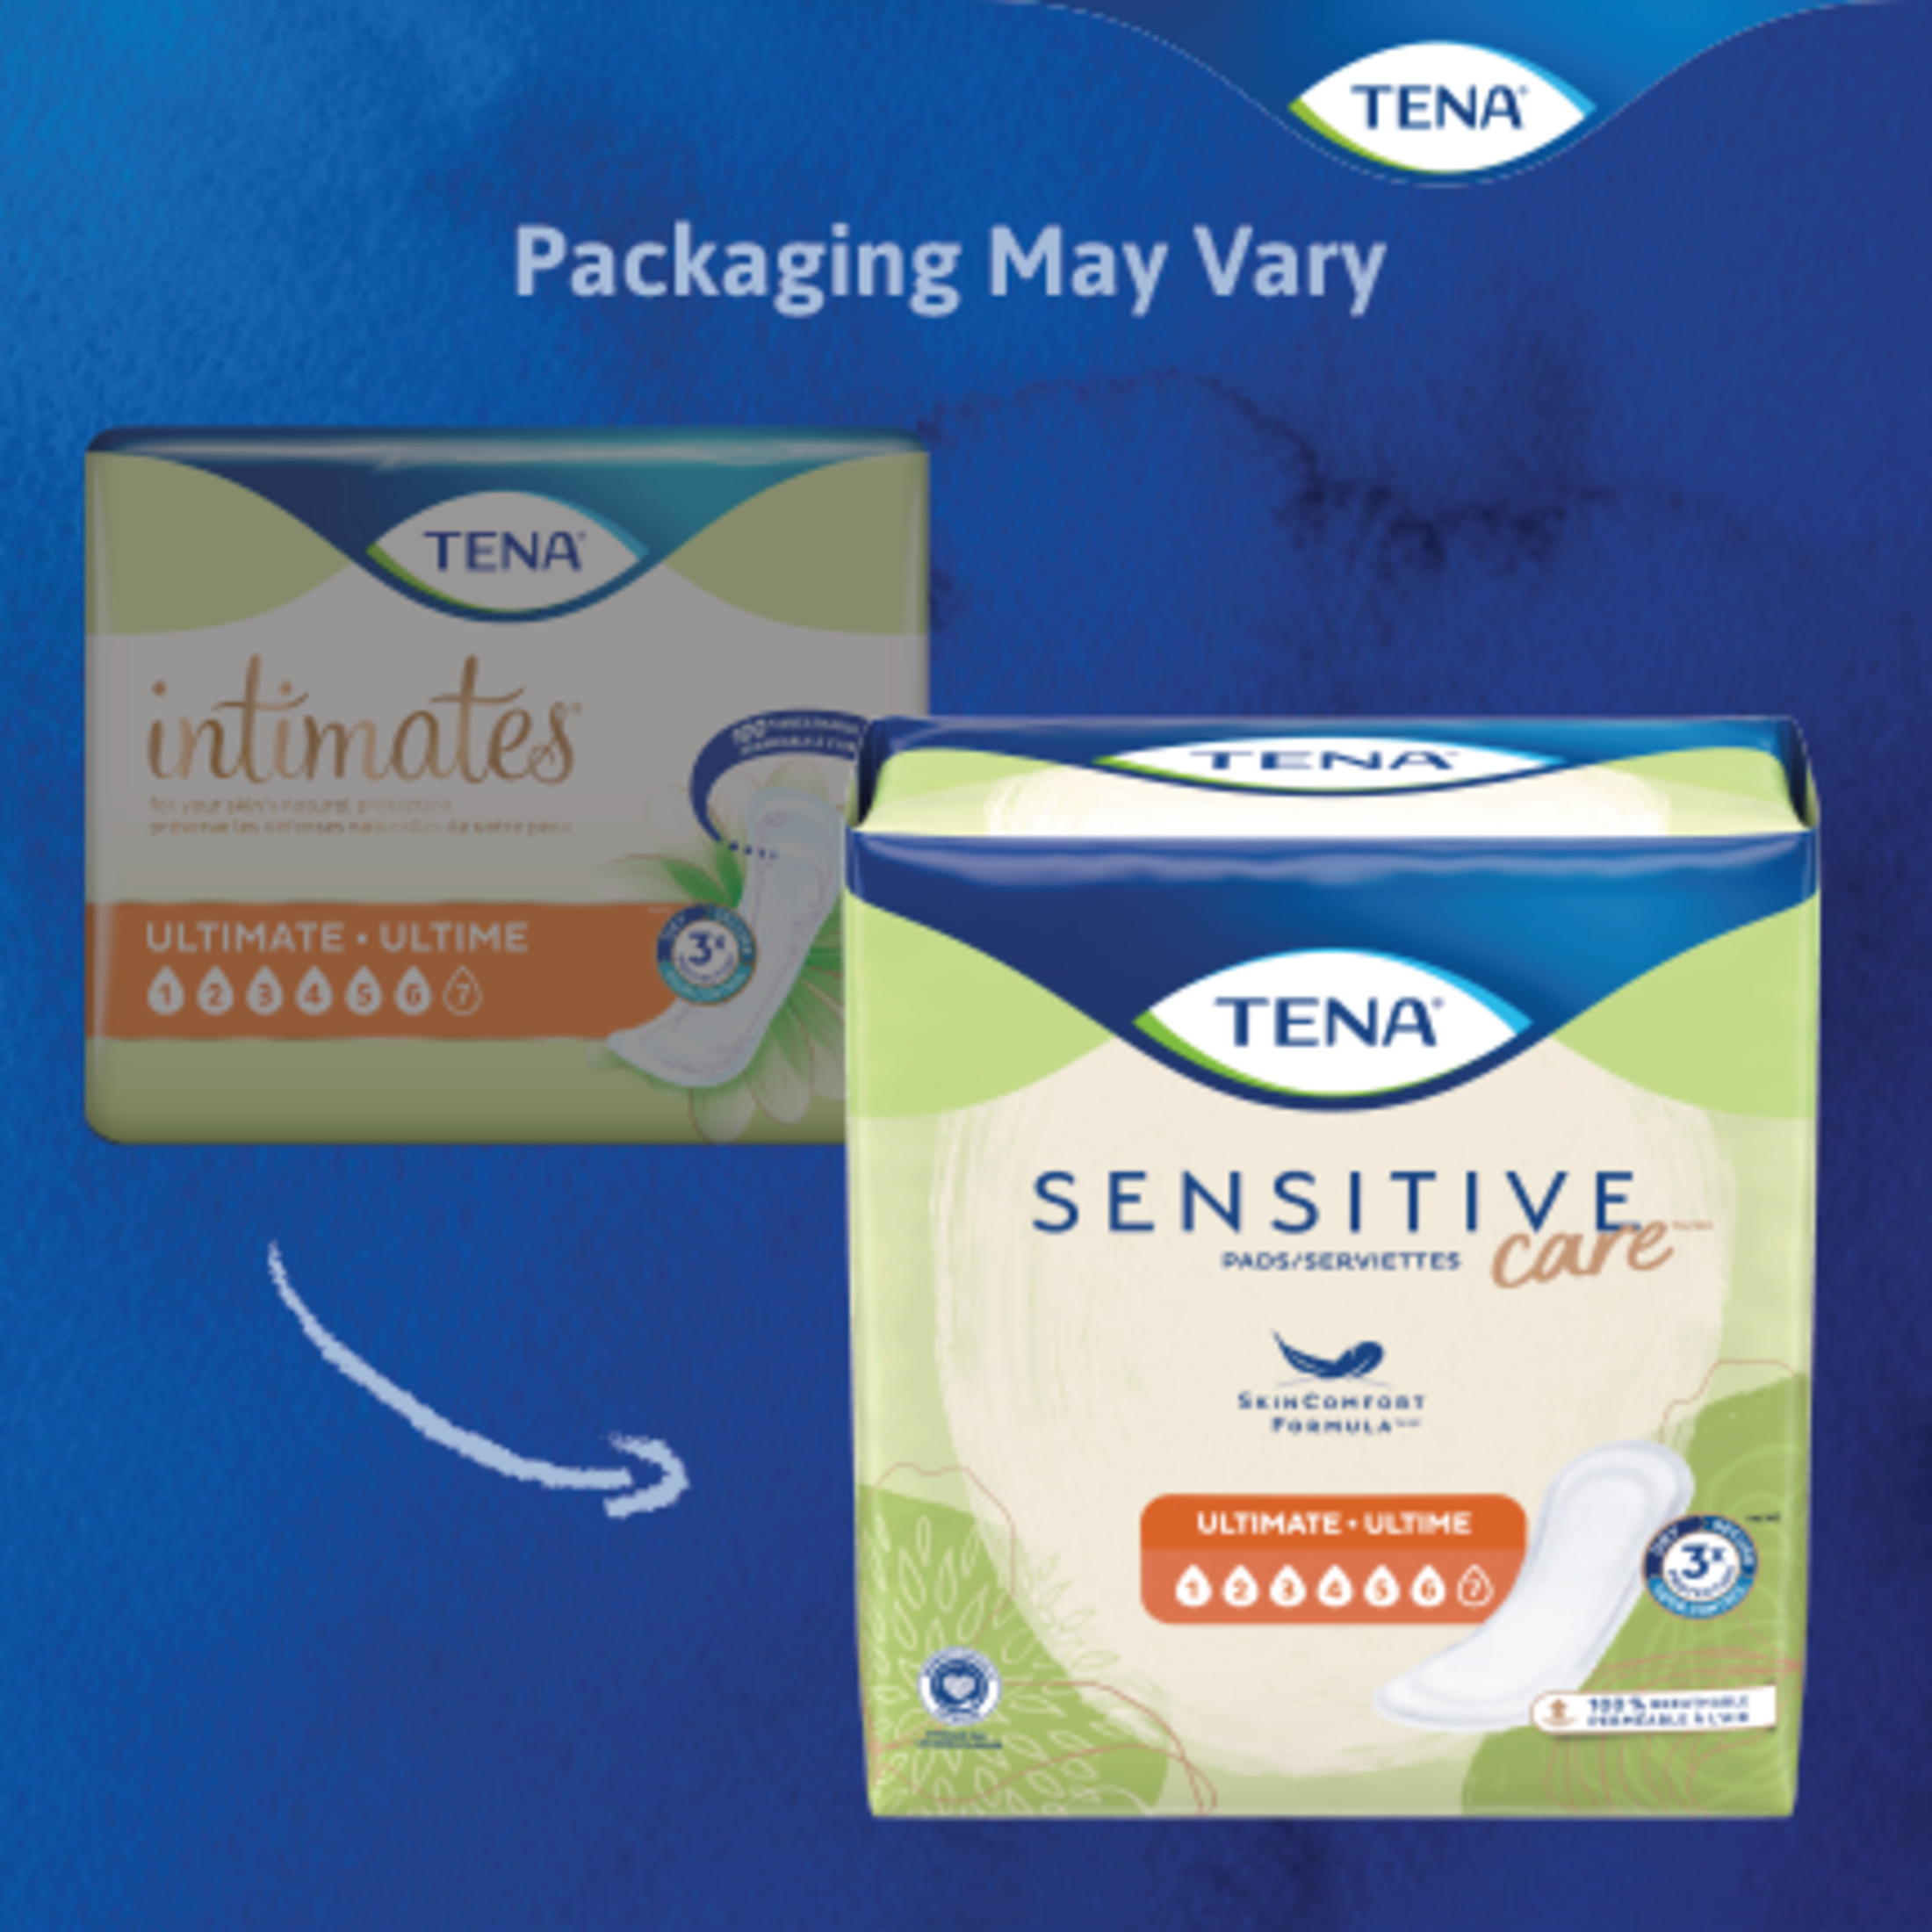 Tena Sensitive Care Ultimate Absorbency Incontinence Pad for Women, 33ct - image 2 of 6